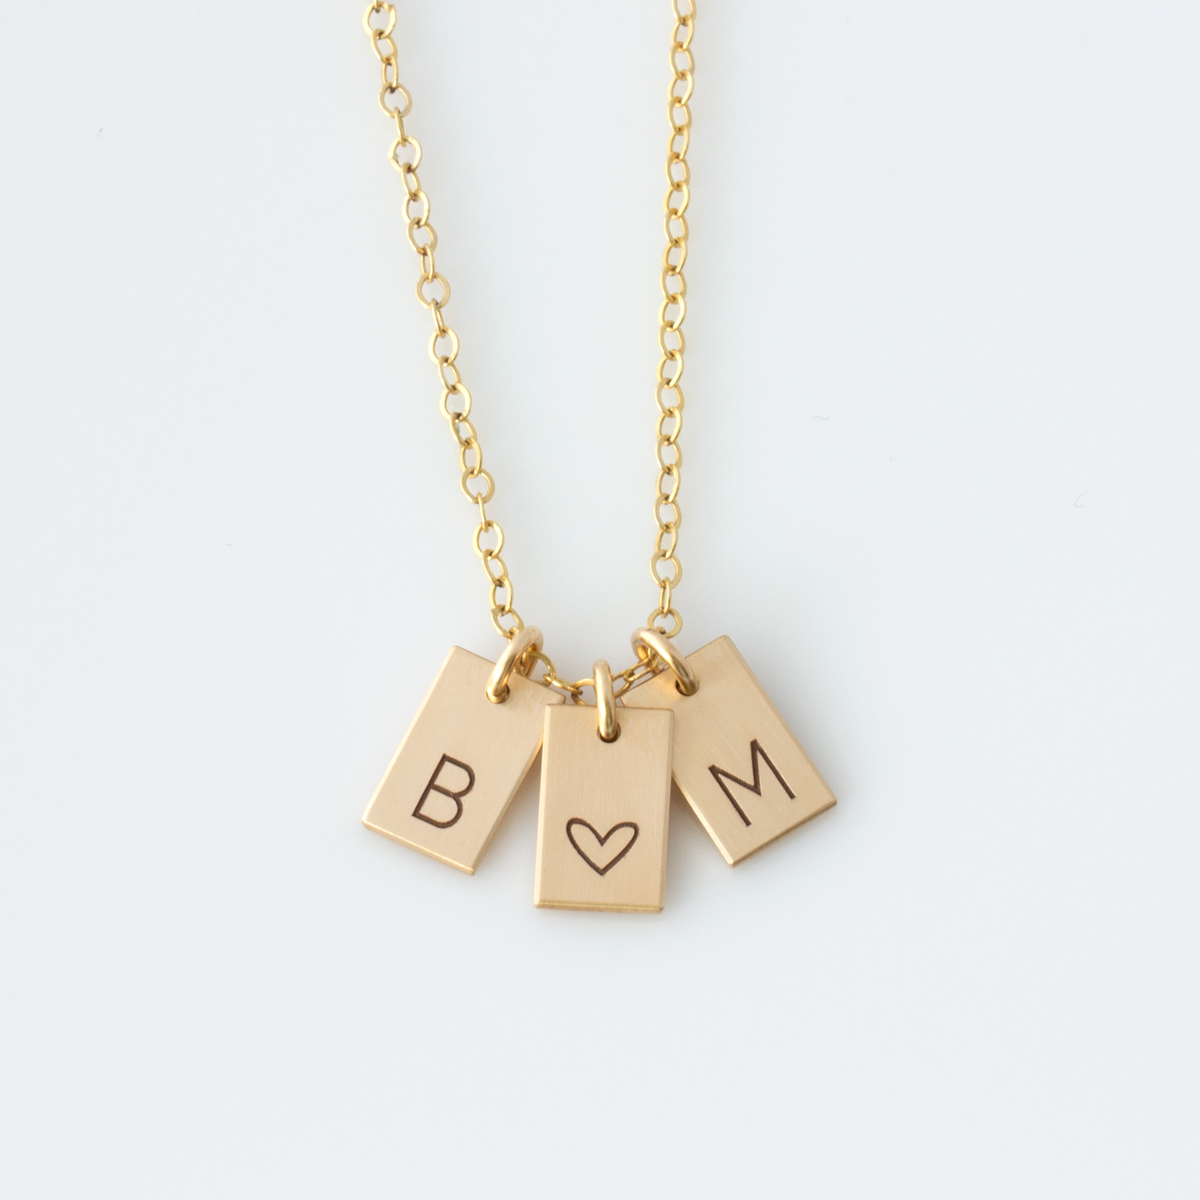 Mini Tags Necklace